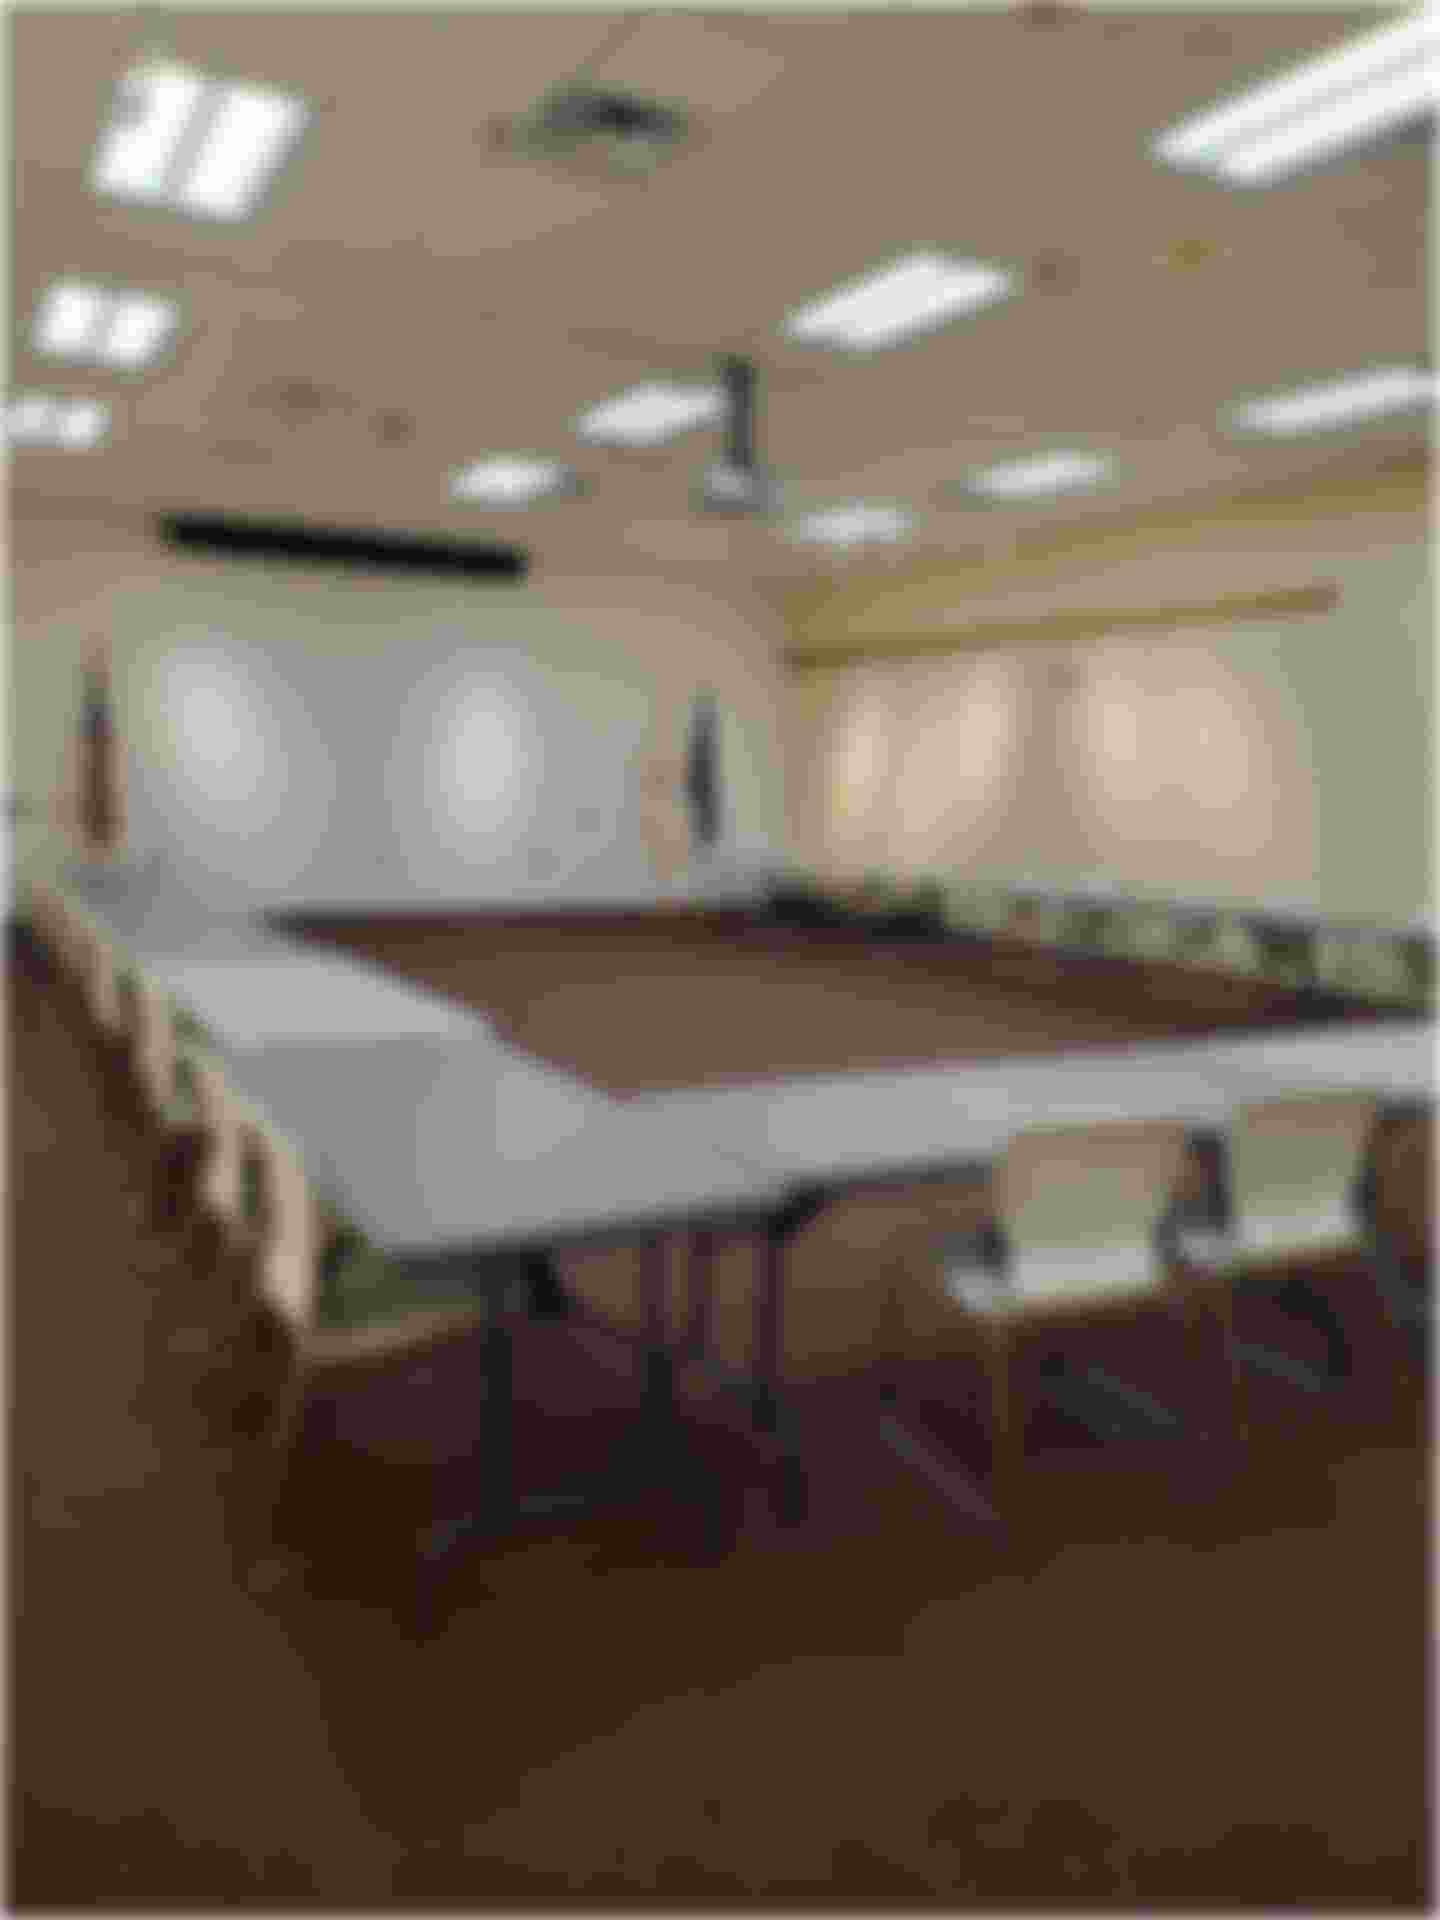 Image of the Central Library Community Room with tables and chairs set up